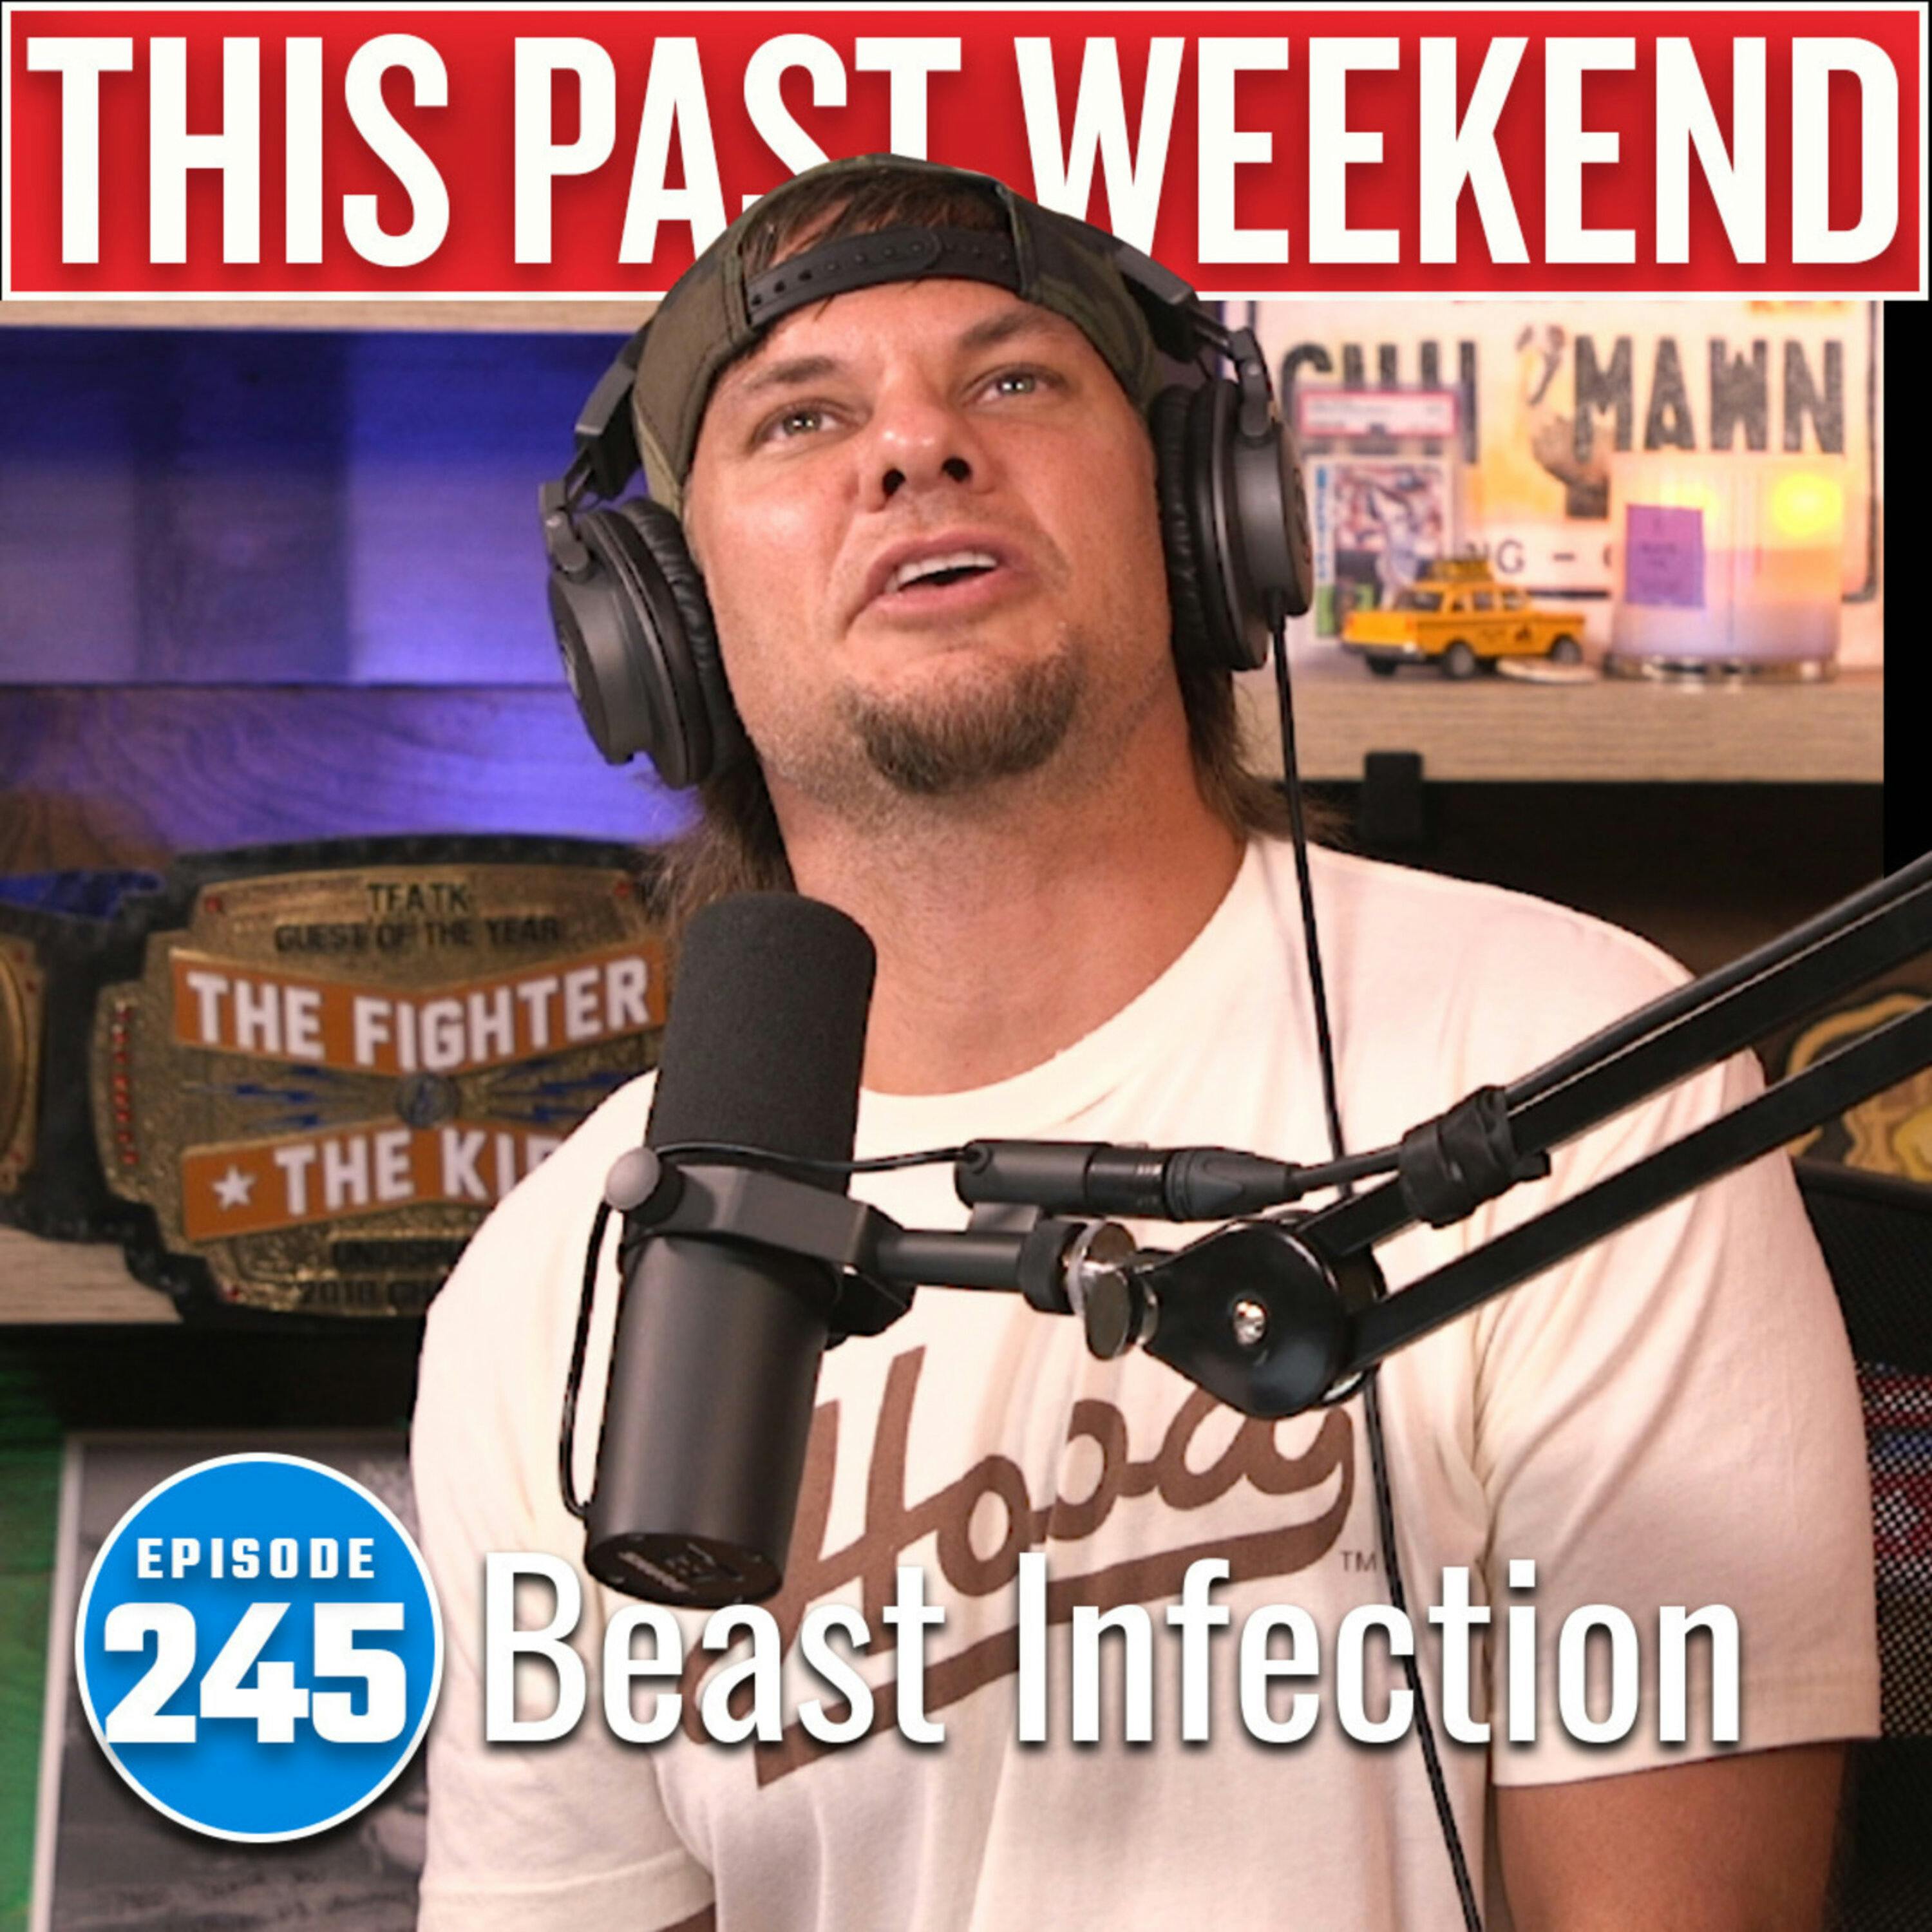 Beast Infection | This Past Weekend #245